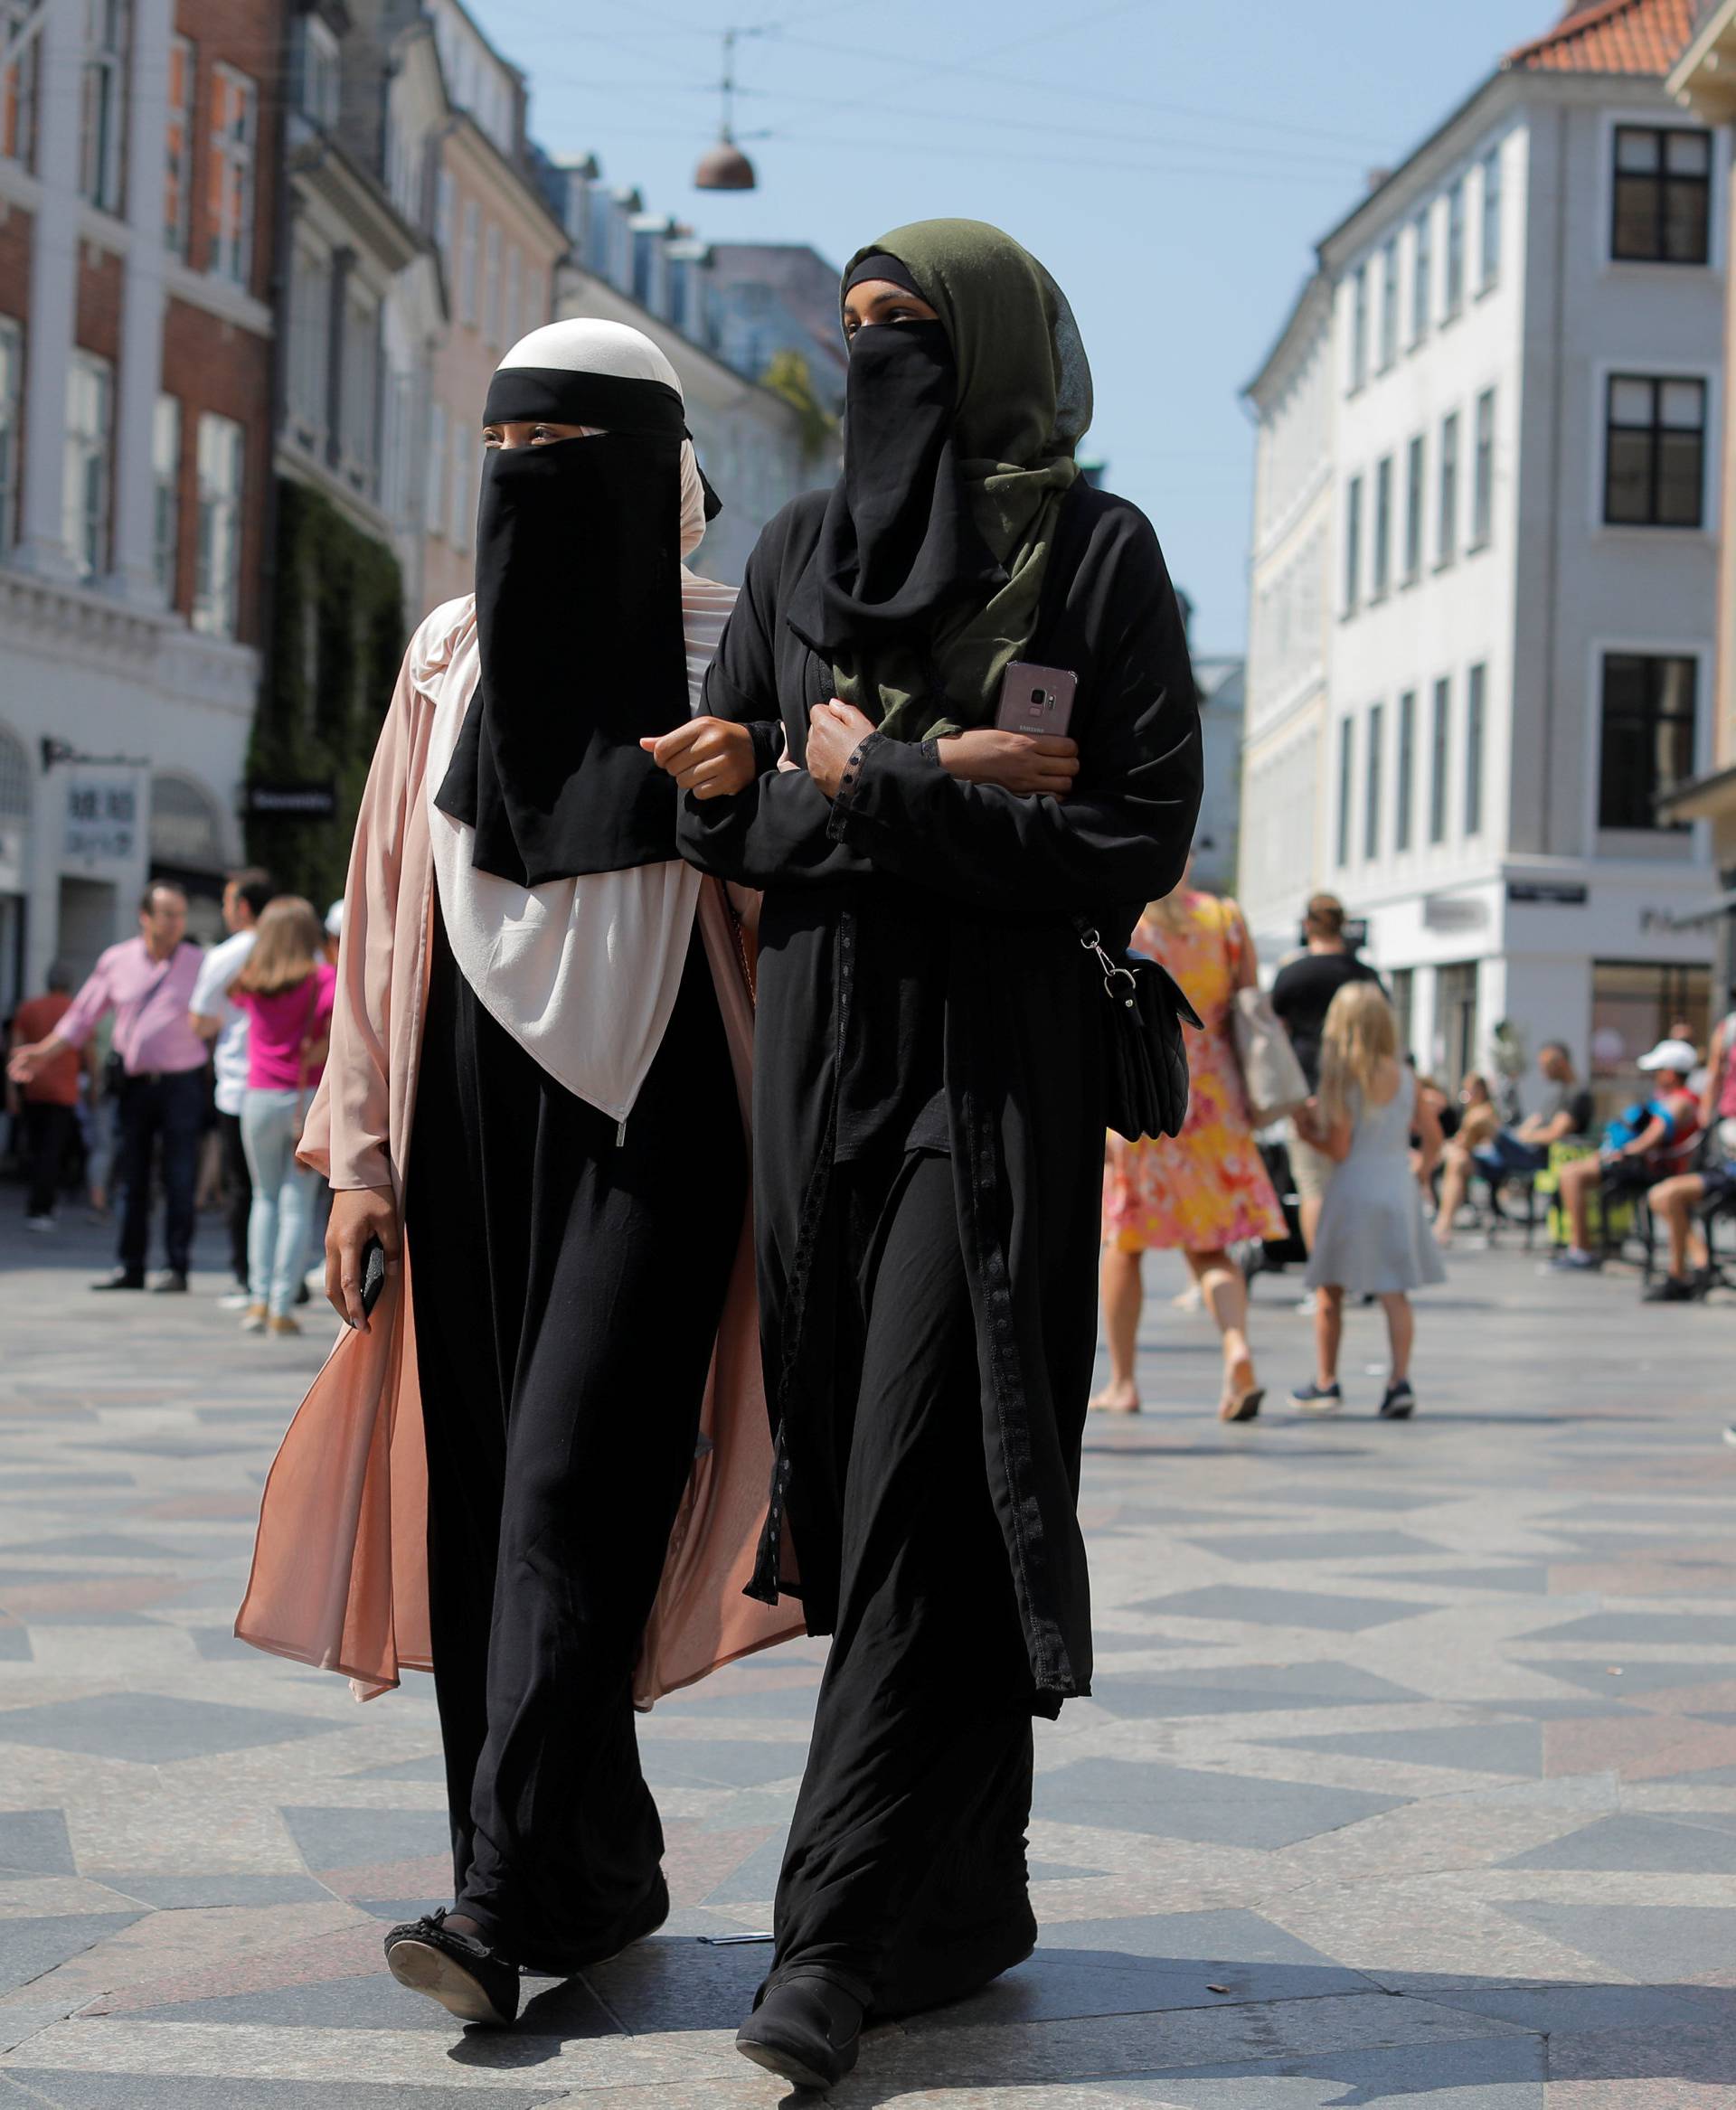 The Wider Image: Crime or right? Some Danish Muslims to defy face veil ban